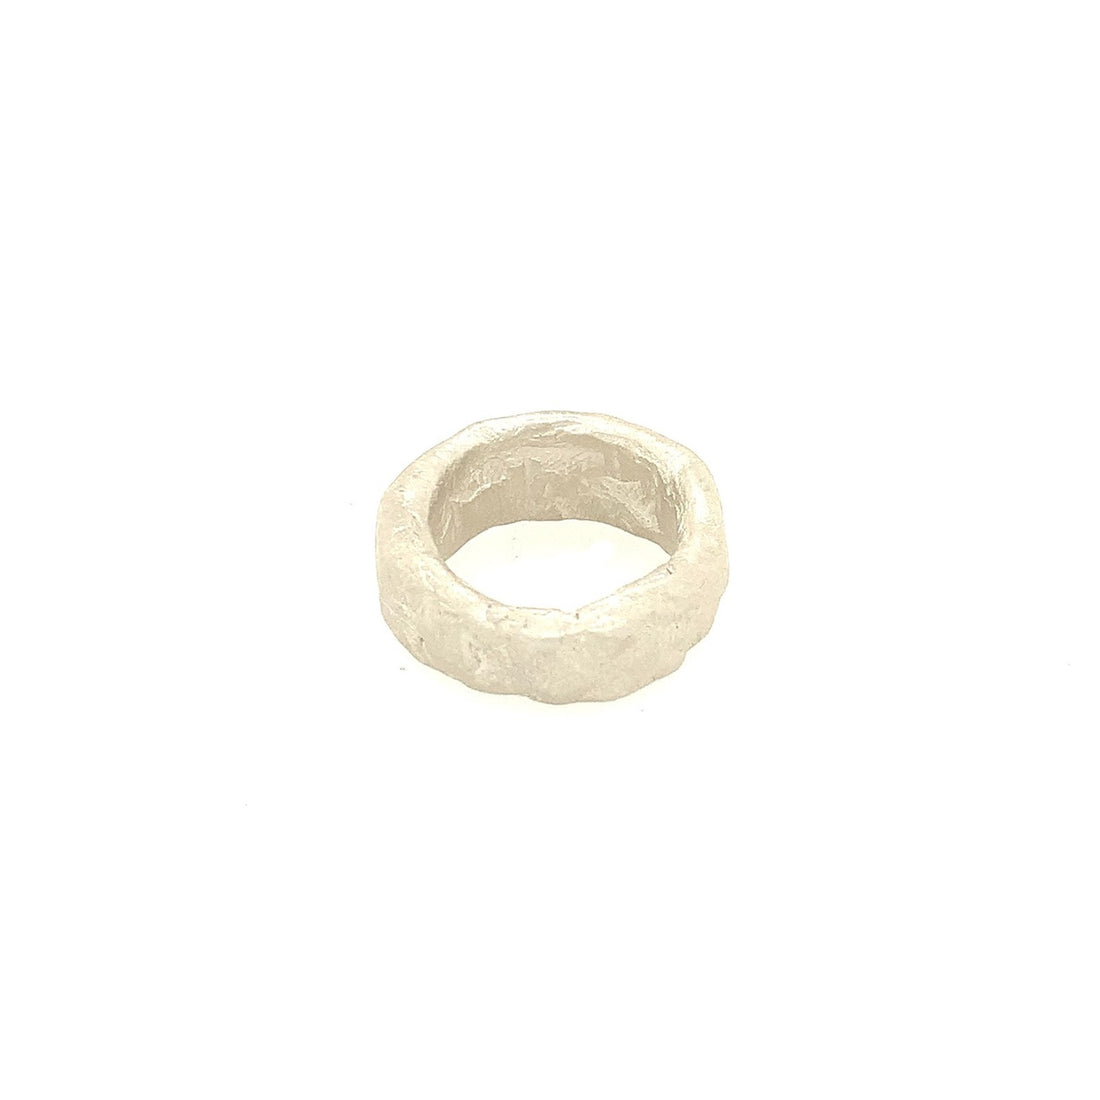 The Rebel Ring is imbued with unique character and soulful imperfections.  It's a bold unconventional statement on it's own or looks great added to any ring stack. It's the ideal ring for everyone and available up to a size 13!  A truly modern ring that says "be bold and celebrate your individuality!"